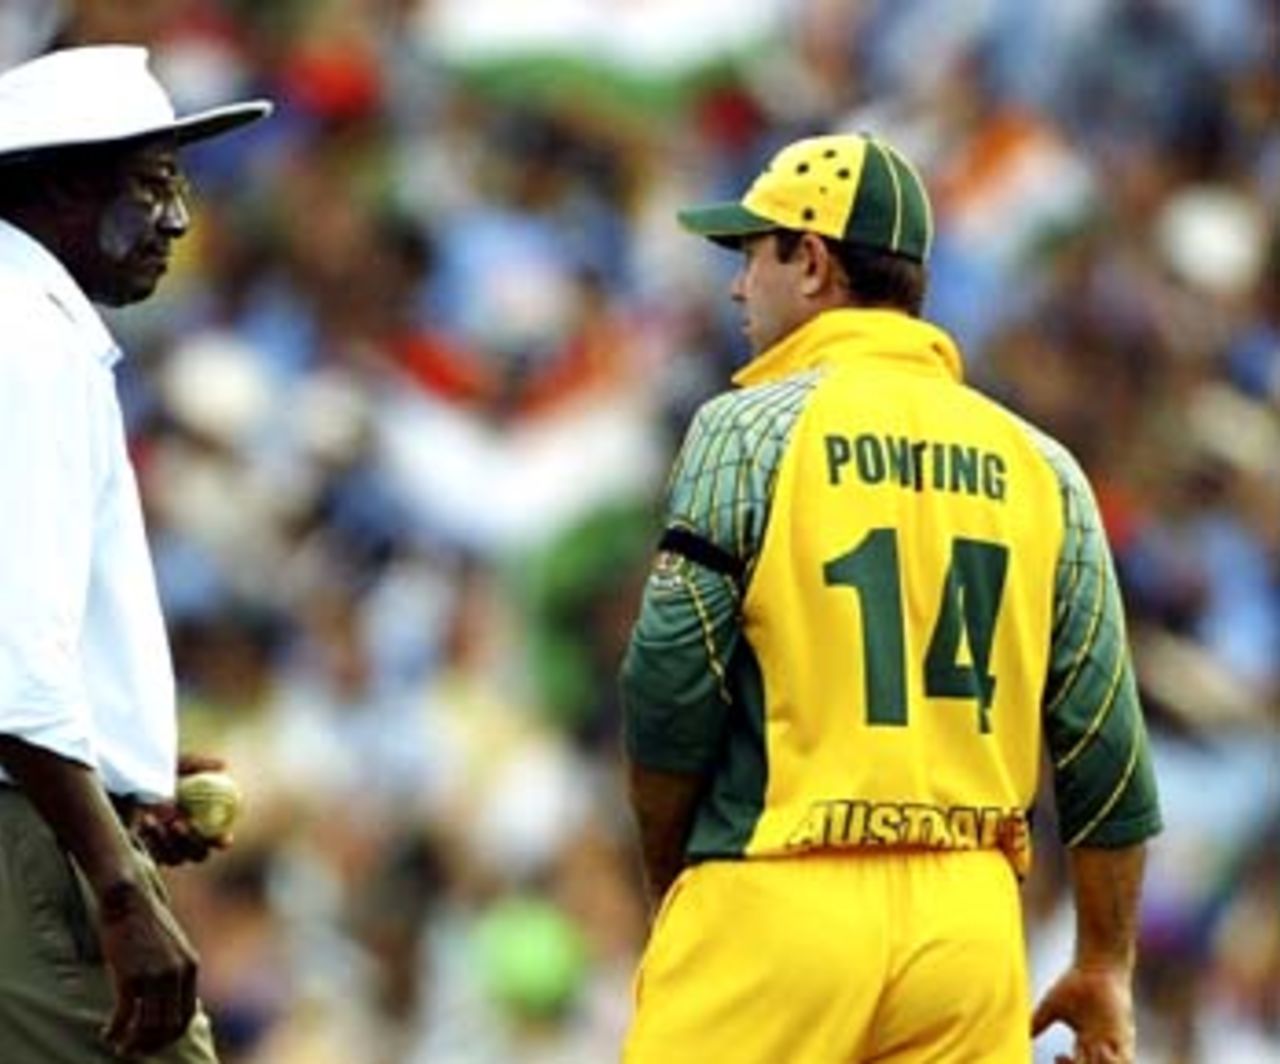 Ricky Ponting and Steve Bucknor have a bit of a chat after the run-out appeal against VVS Laxman was turned down, Australia v India, VB Series, 7th ODI, Sydney, January 22, 2004